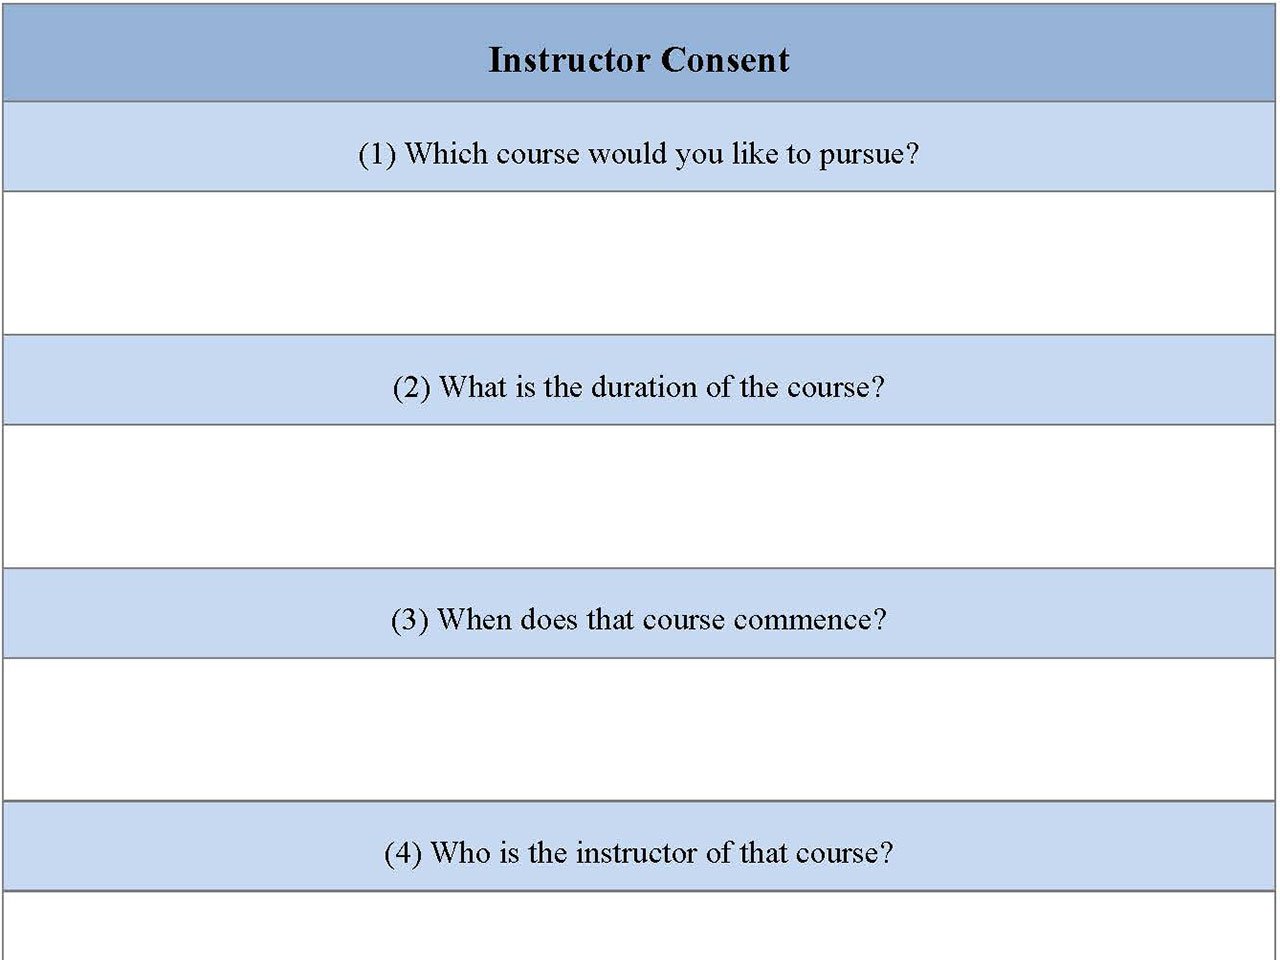 Instructor consent forms